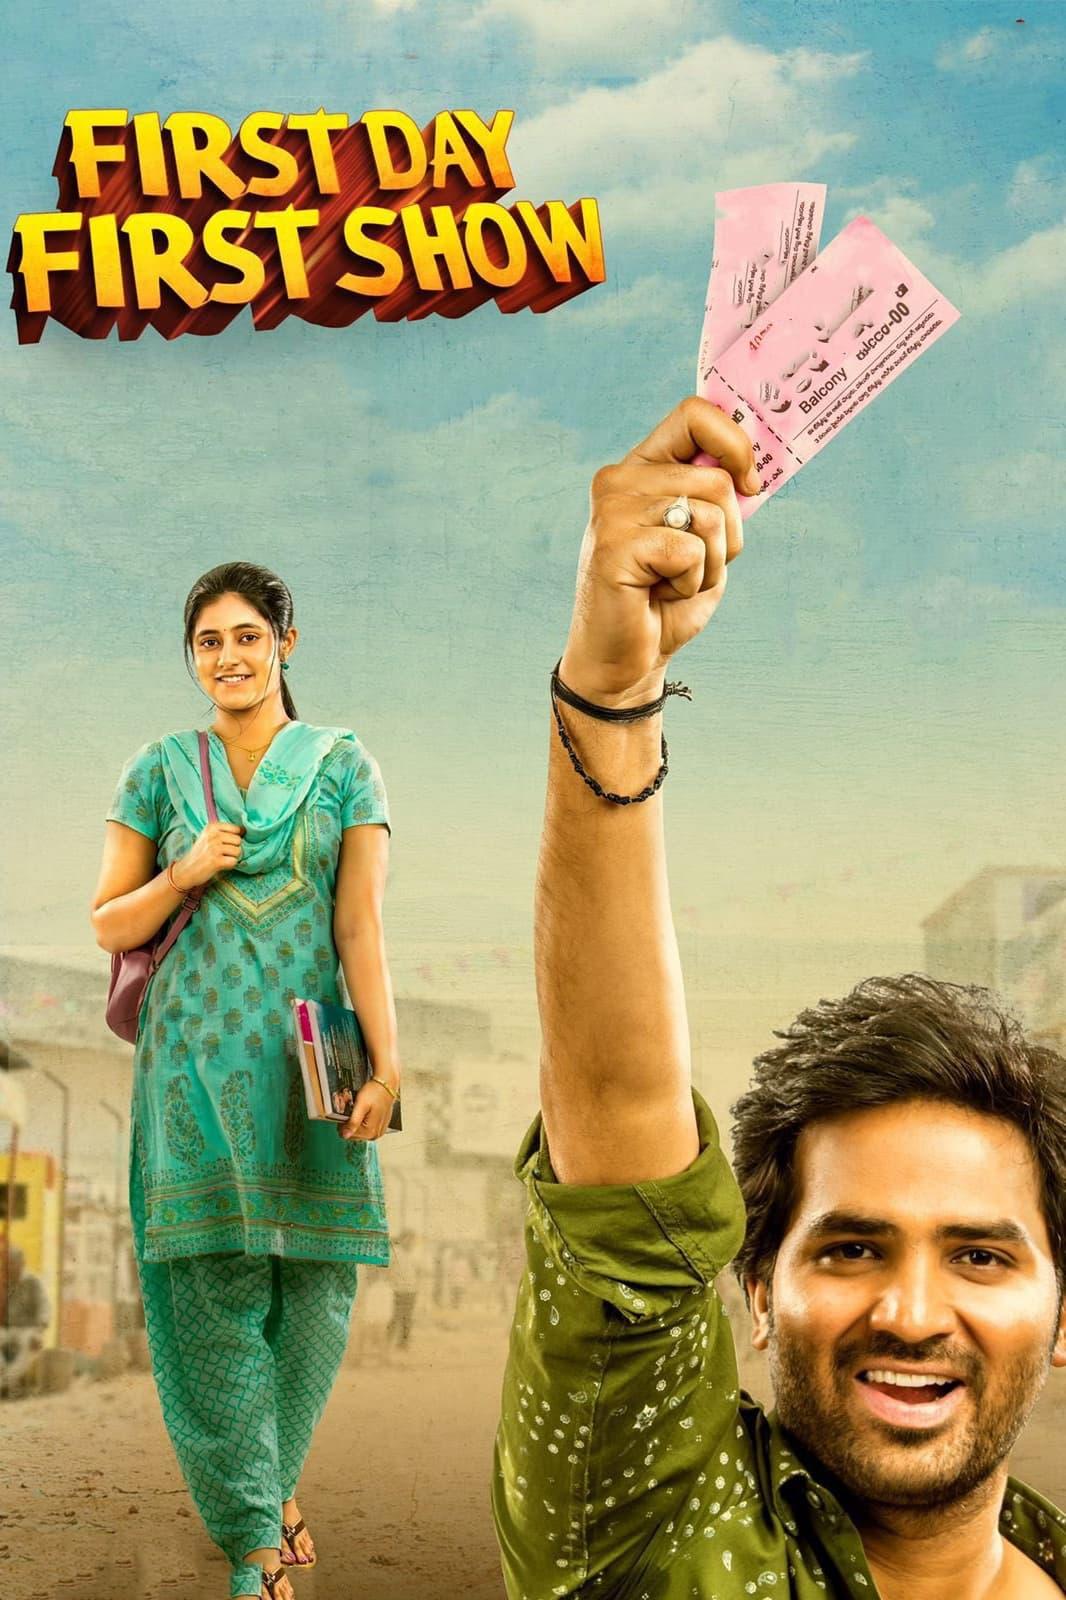 First Day First Show poster